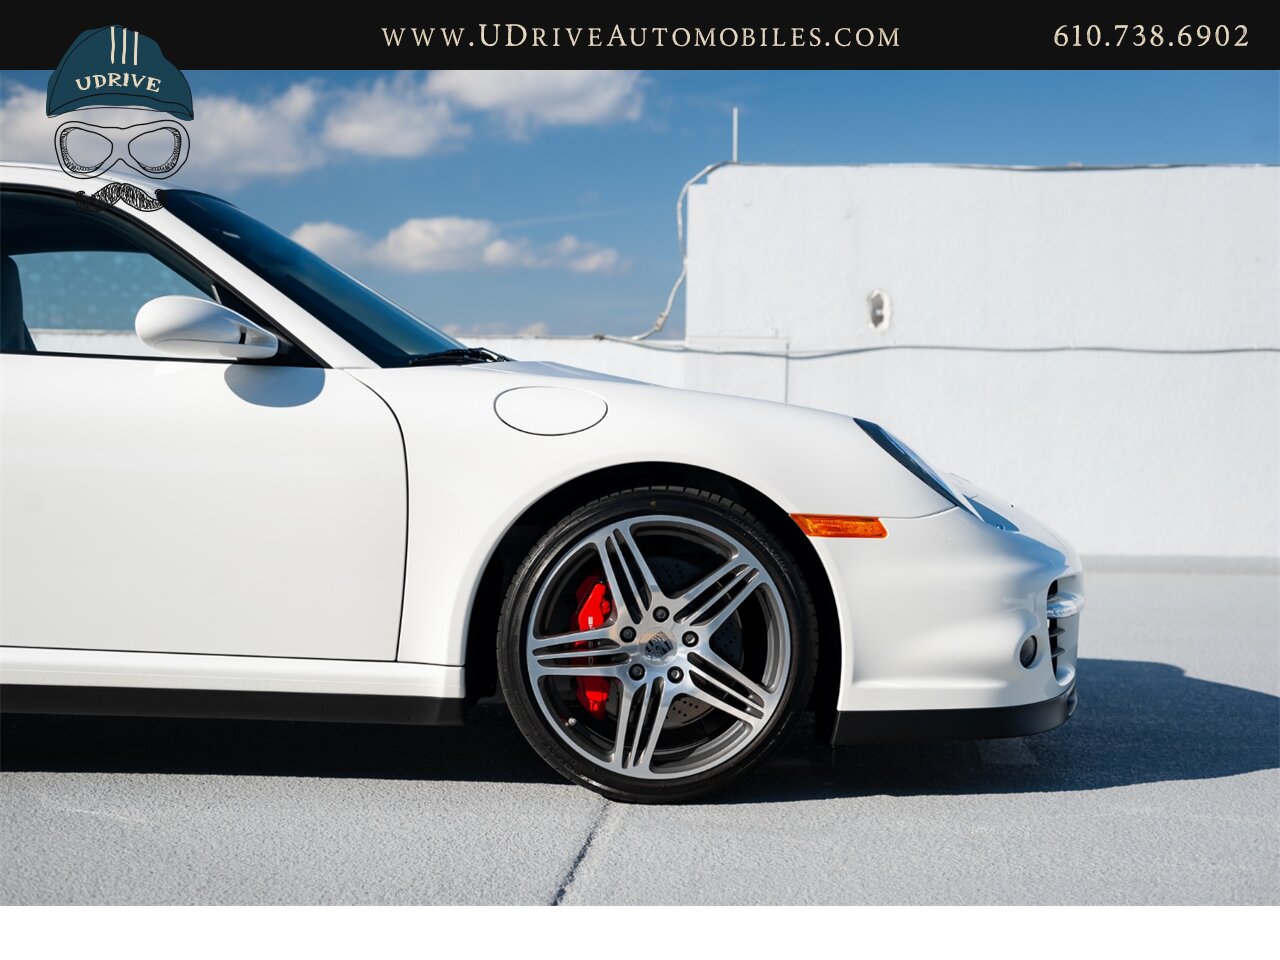 2007 Porsche 911 Turbo 642 Miles 1 Owner Carrara White 997  Sport Chrono Adaptive Sport Seats All Documentation from New - Photo 12 - West Chester, PA 19382